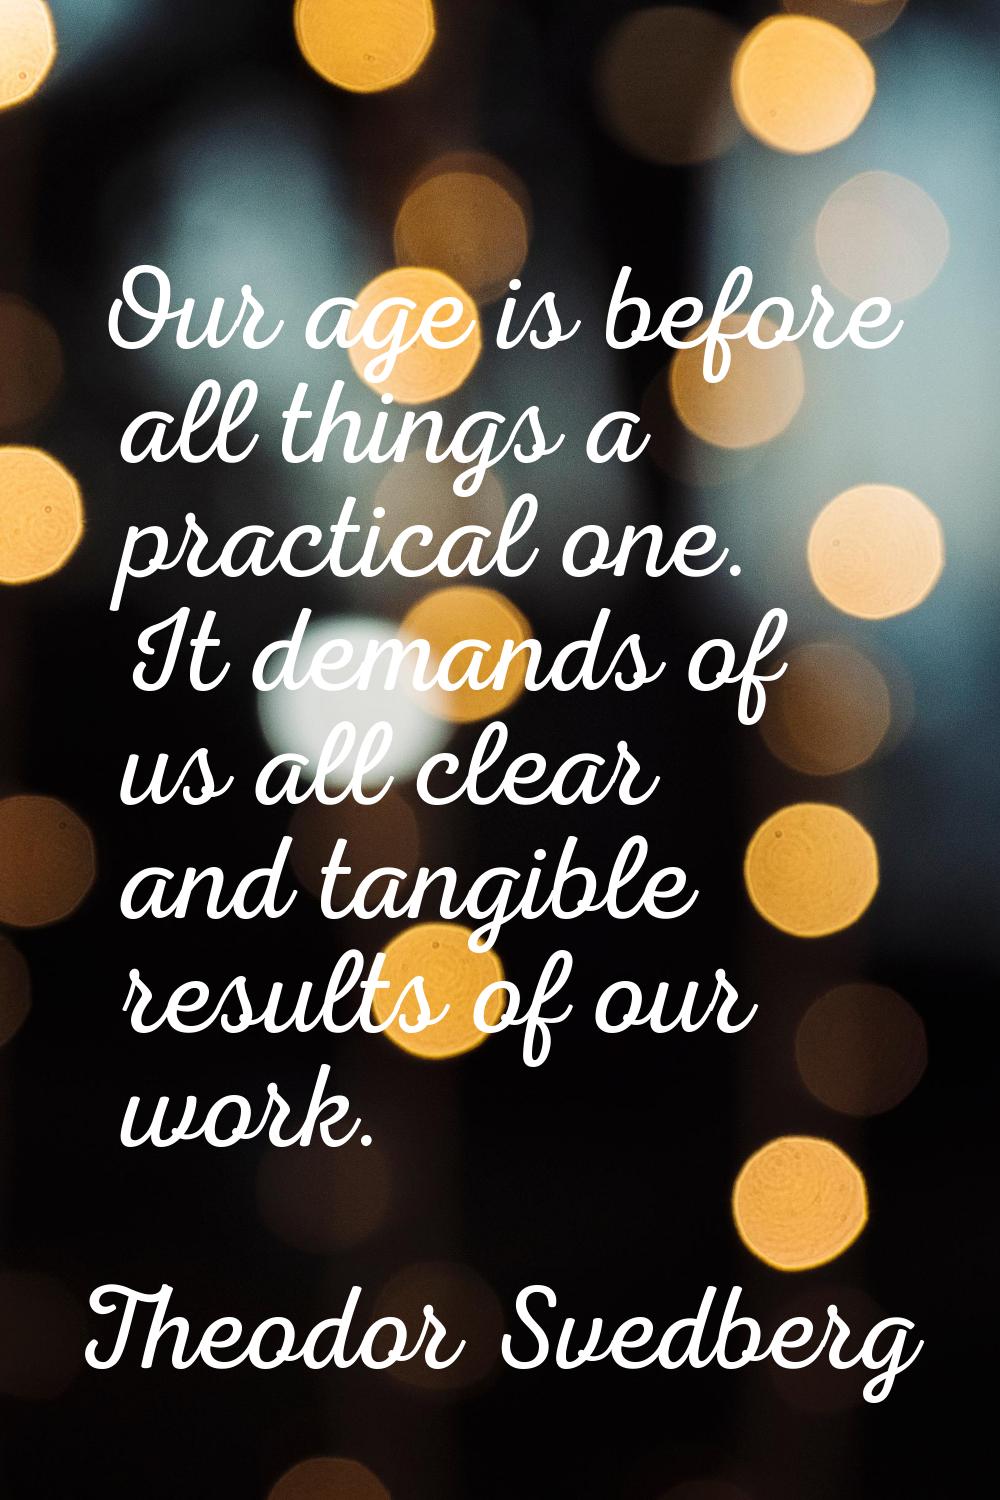 Our age is before all things a practical one. It demands of us all clear and tangible results of ou